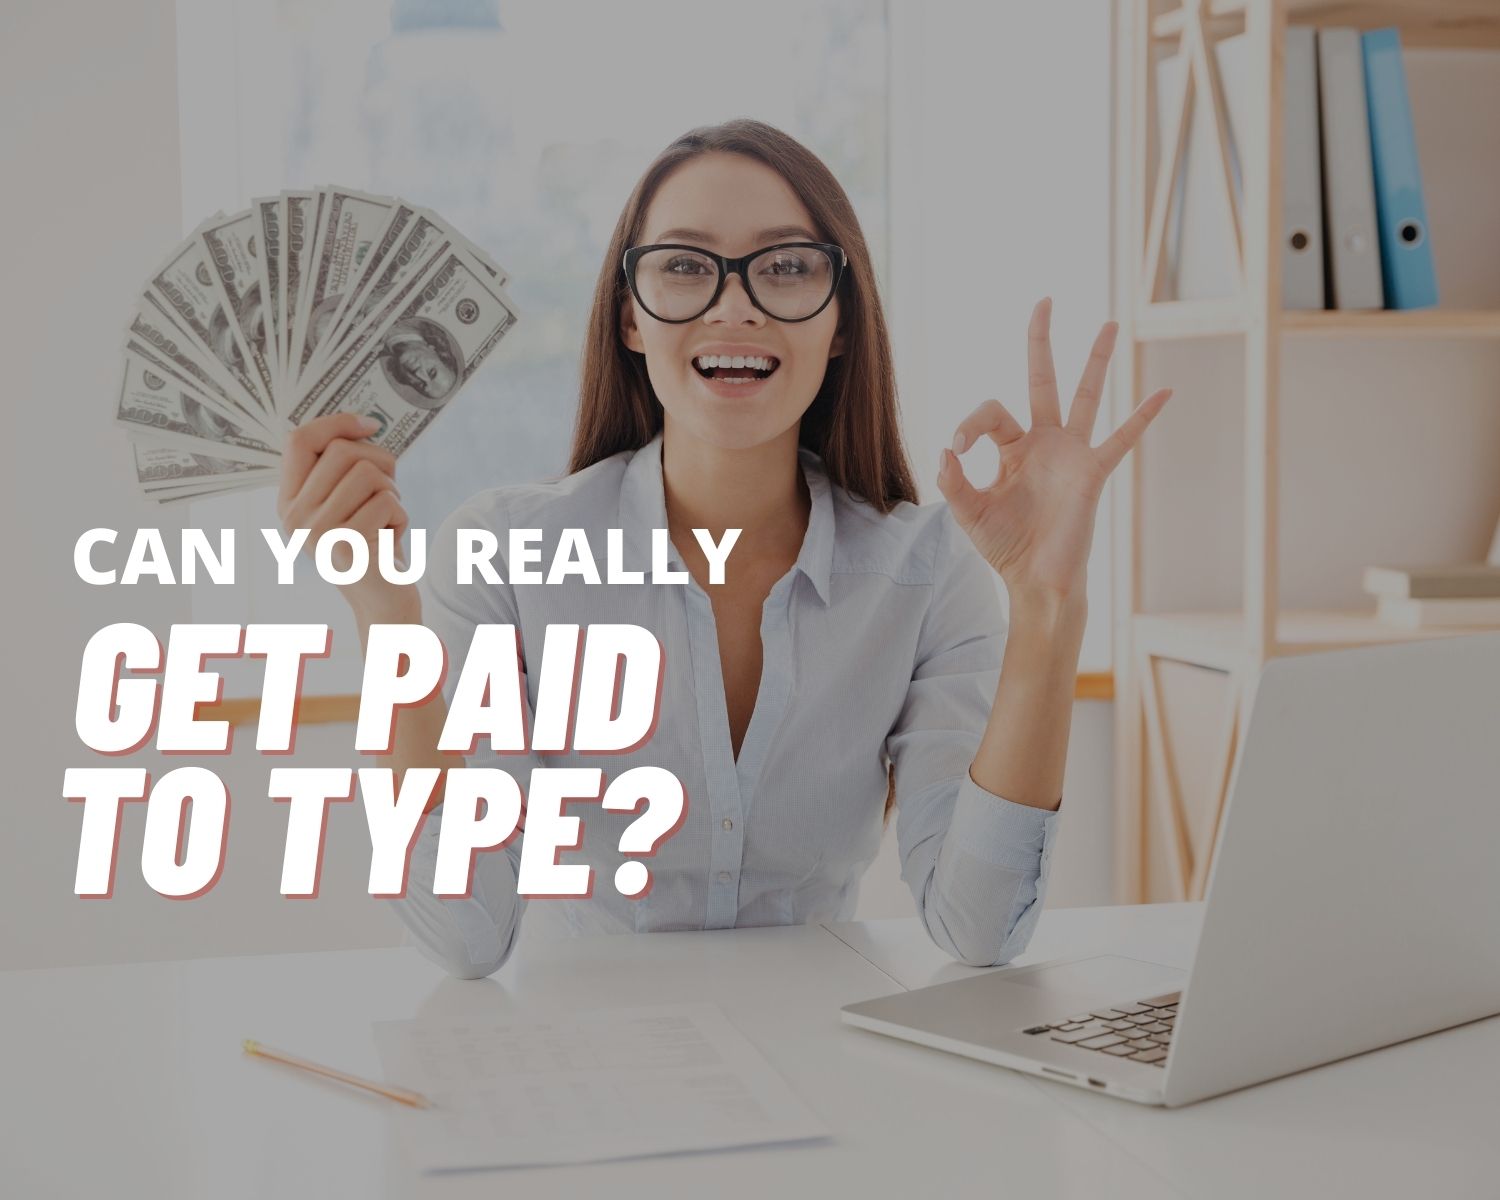 Can you really get paid to type?